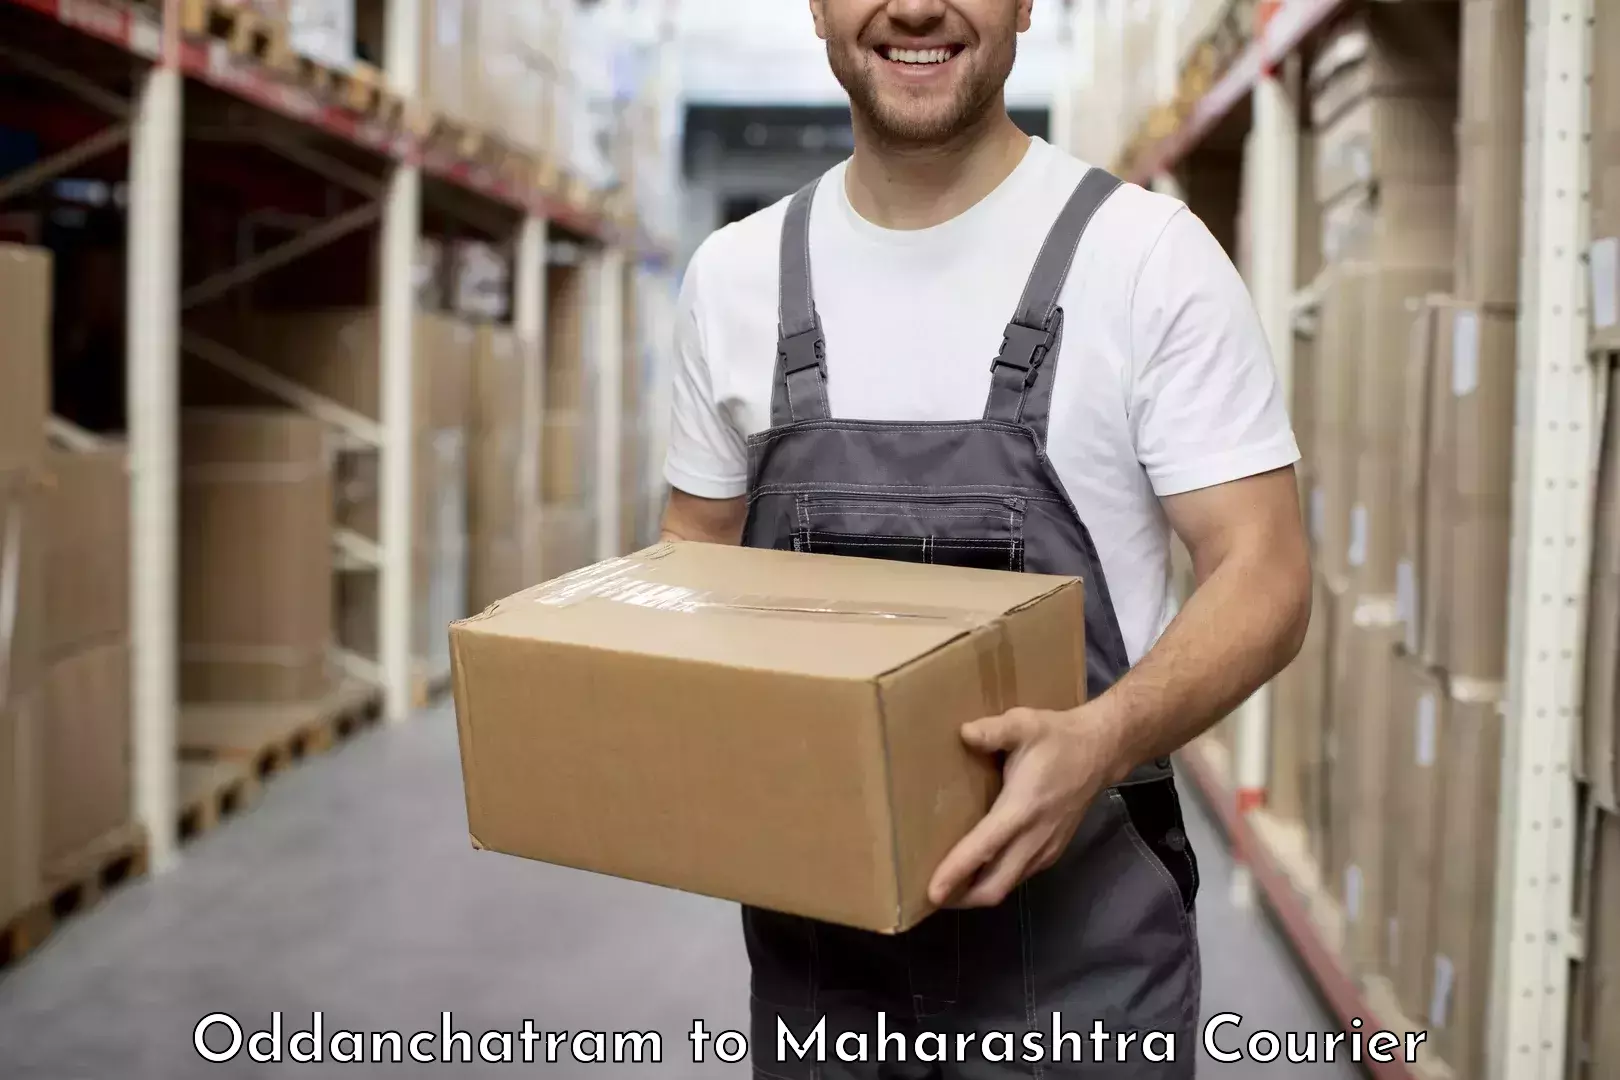 Cost-effective shipping solutions Oddanchatram to Shevgaon